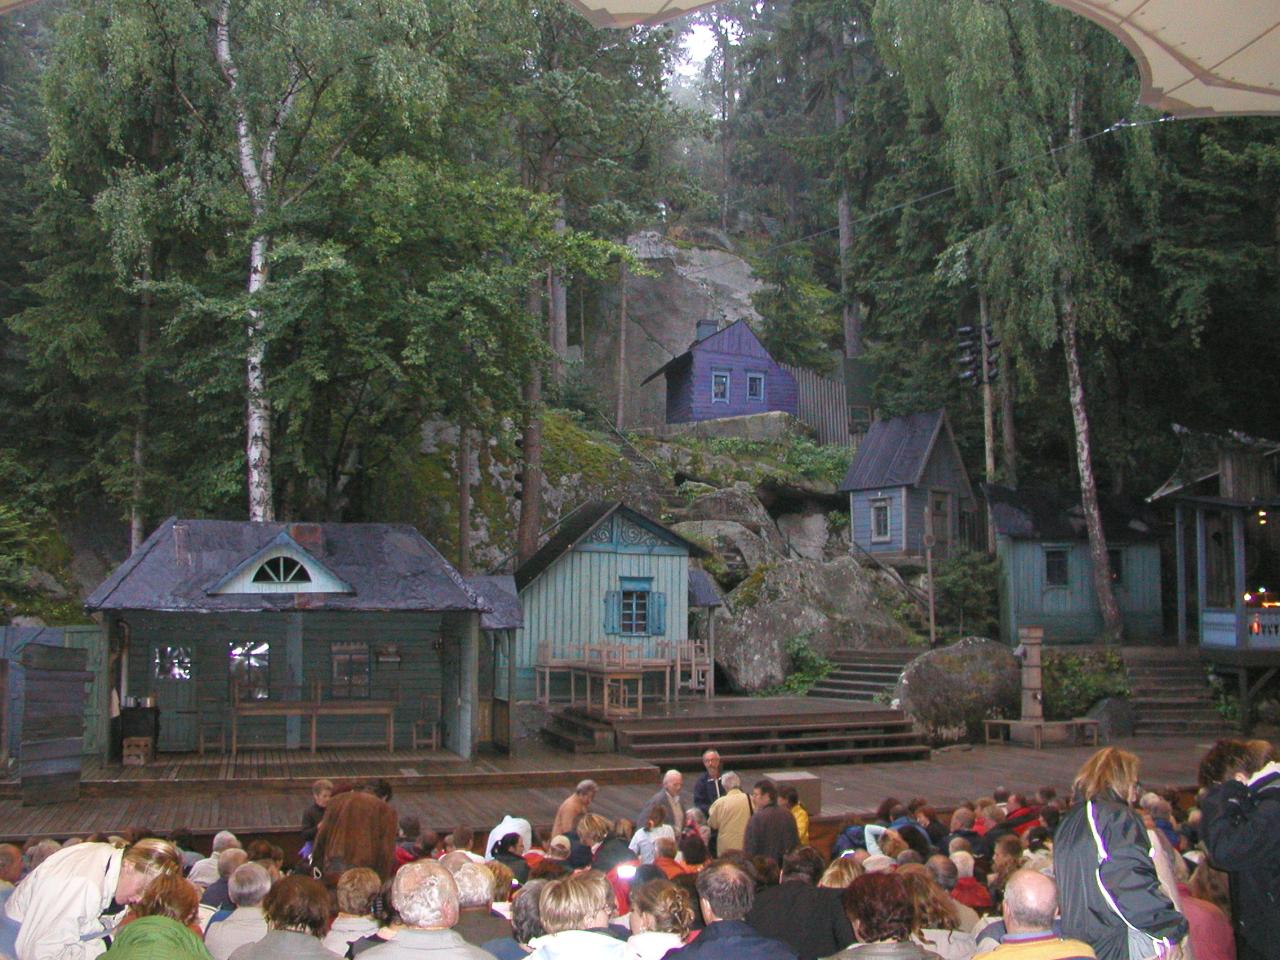 JPEG image - The open-air stage where we saw a performance of 